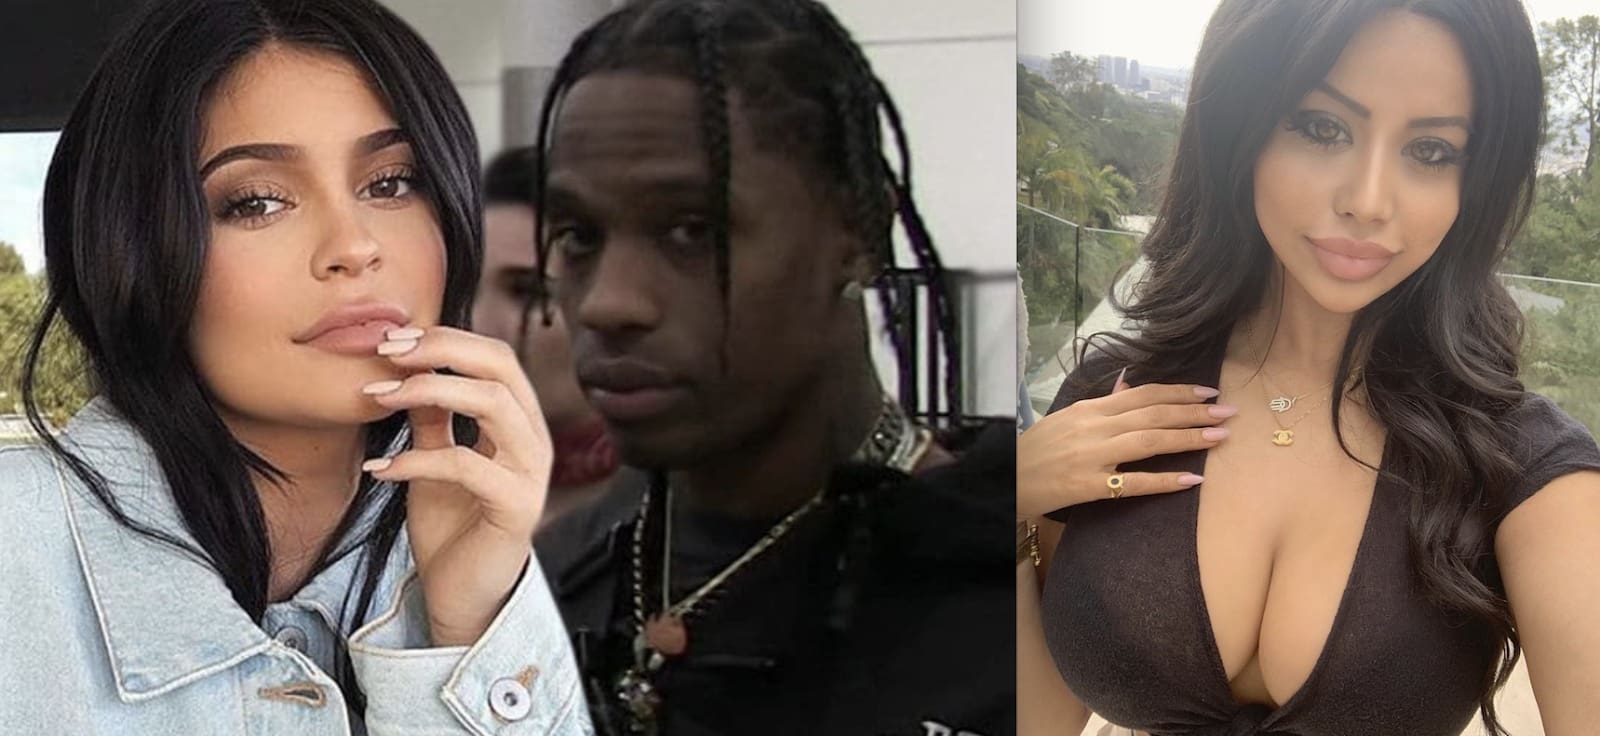 Travis Scott's Alleged Secret Side Chick Says There's Someone 'Rich & Powerful' Trying To Kill Her Success